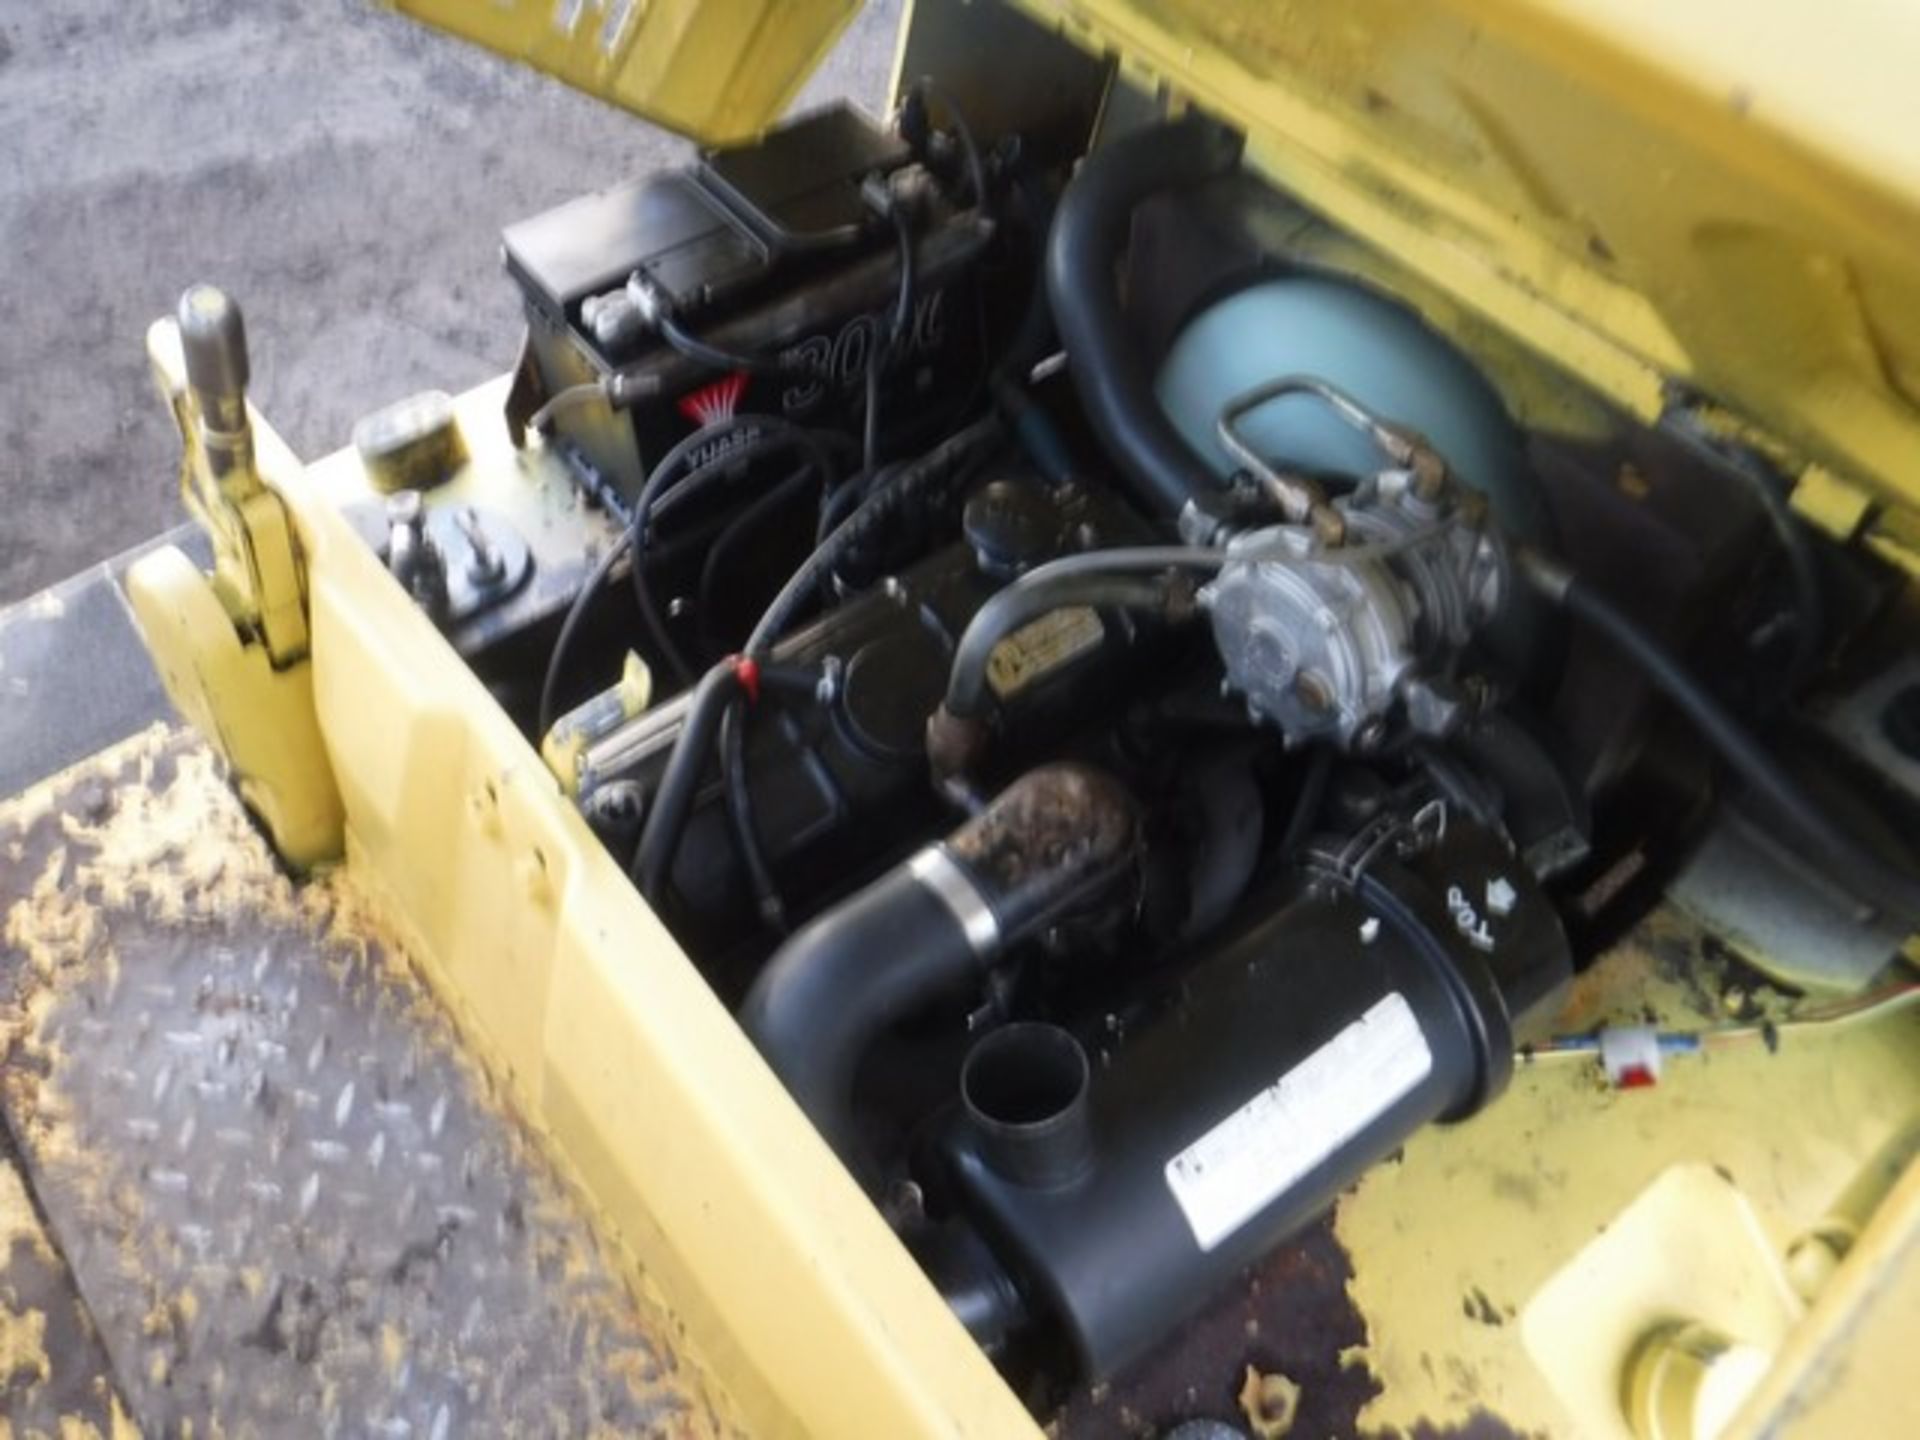 1989 HYSTER H2.50XL 2.5 tone gas forklift c/w side shift. S/NA177B36136K 650hrs (not verified) - Image 8 of 11